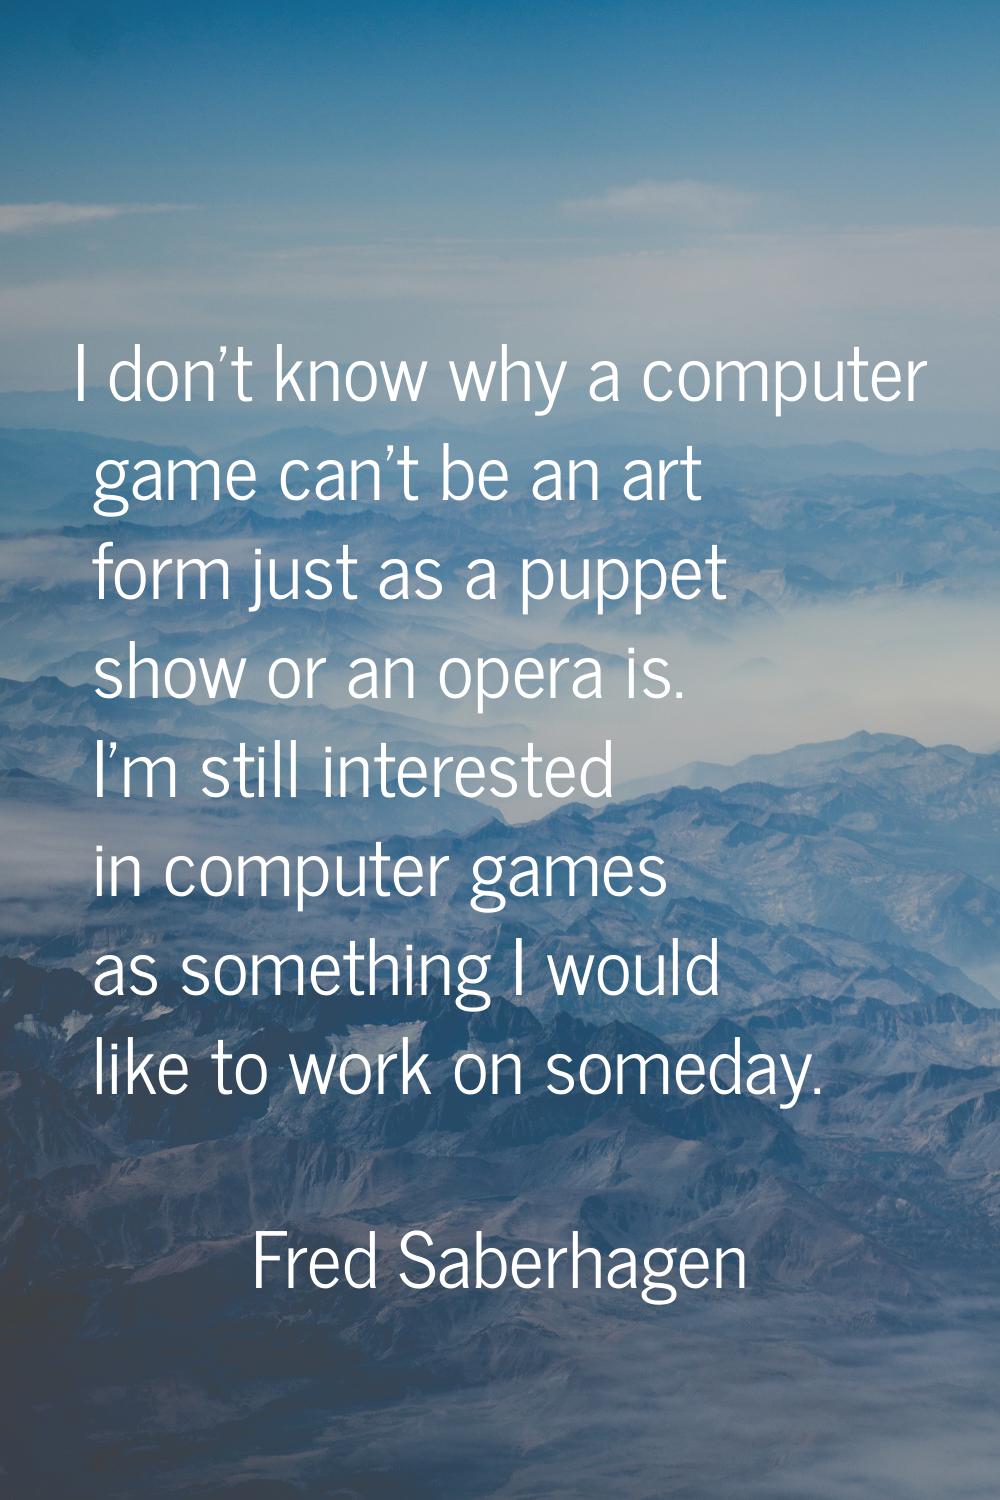 I don't know why a computer game can't be an art form just as a puppet show or an opera is. I'm sti